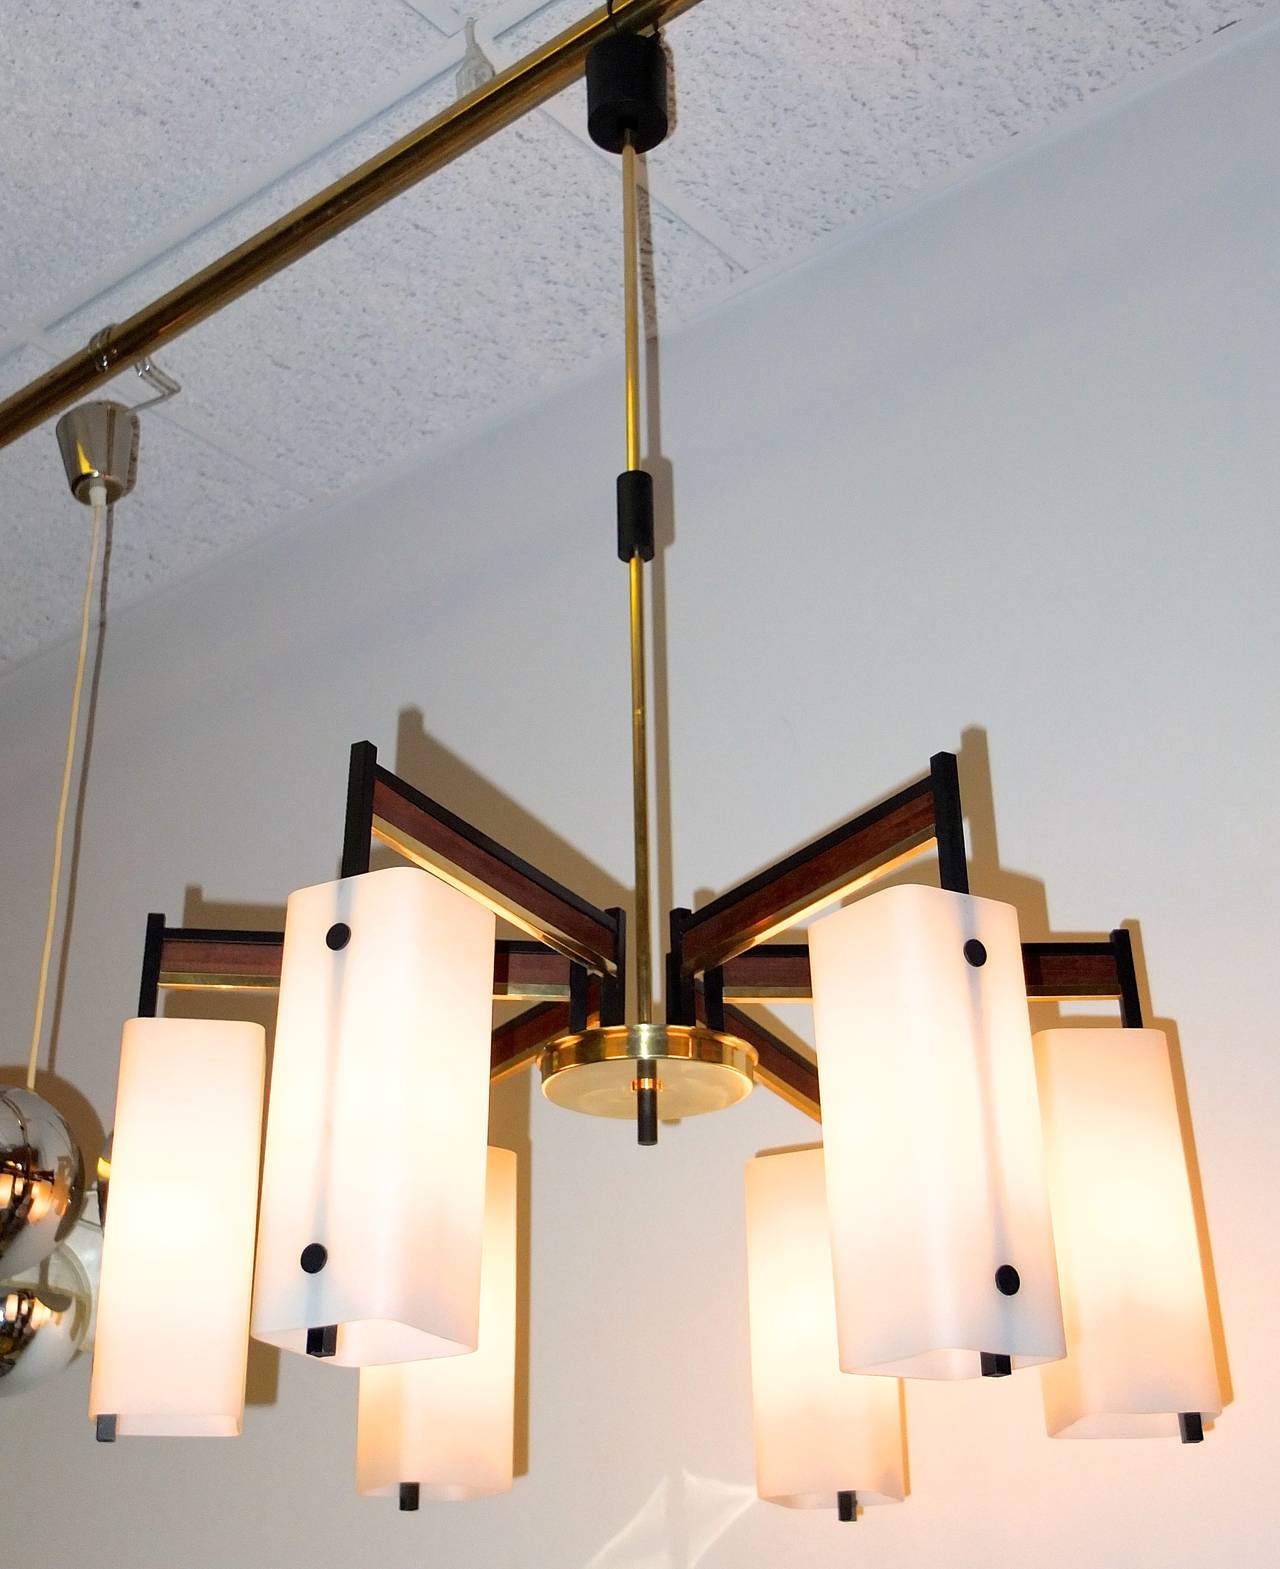 1950's Italian chandelier attributed to Stilnovo with six arms with suspended opaline glass box shades.  Brass, black enameled brass and walnut. Completely restored.  Height adjustable. Up to 75 watts per  socket for 450 watts total.

Dimensions: